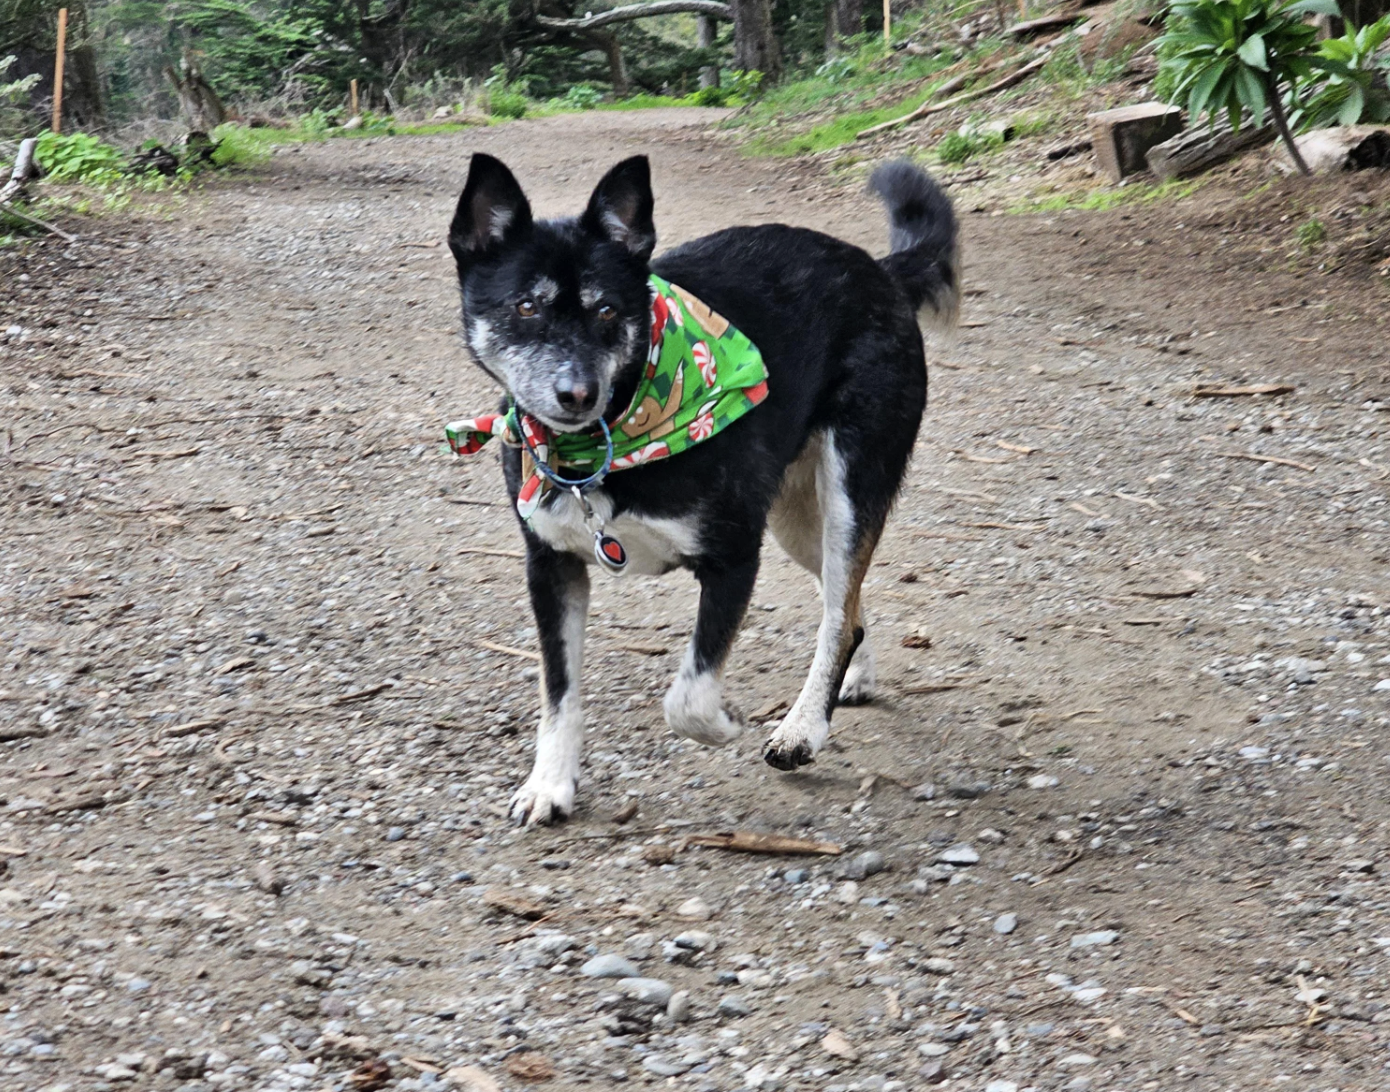 Dog with a green patterned bandana walking on a trail